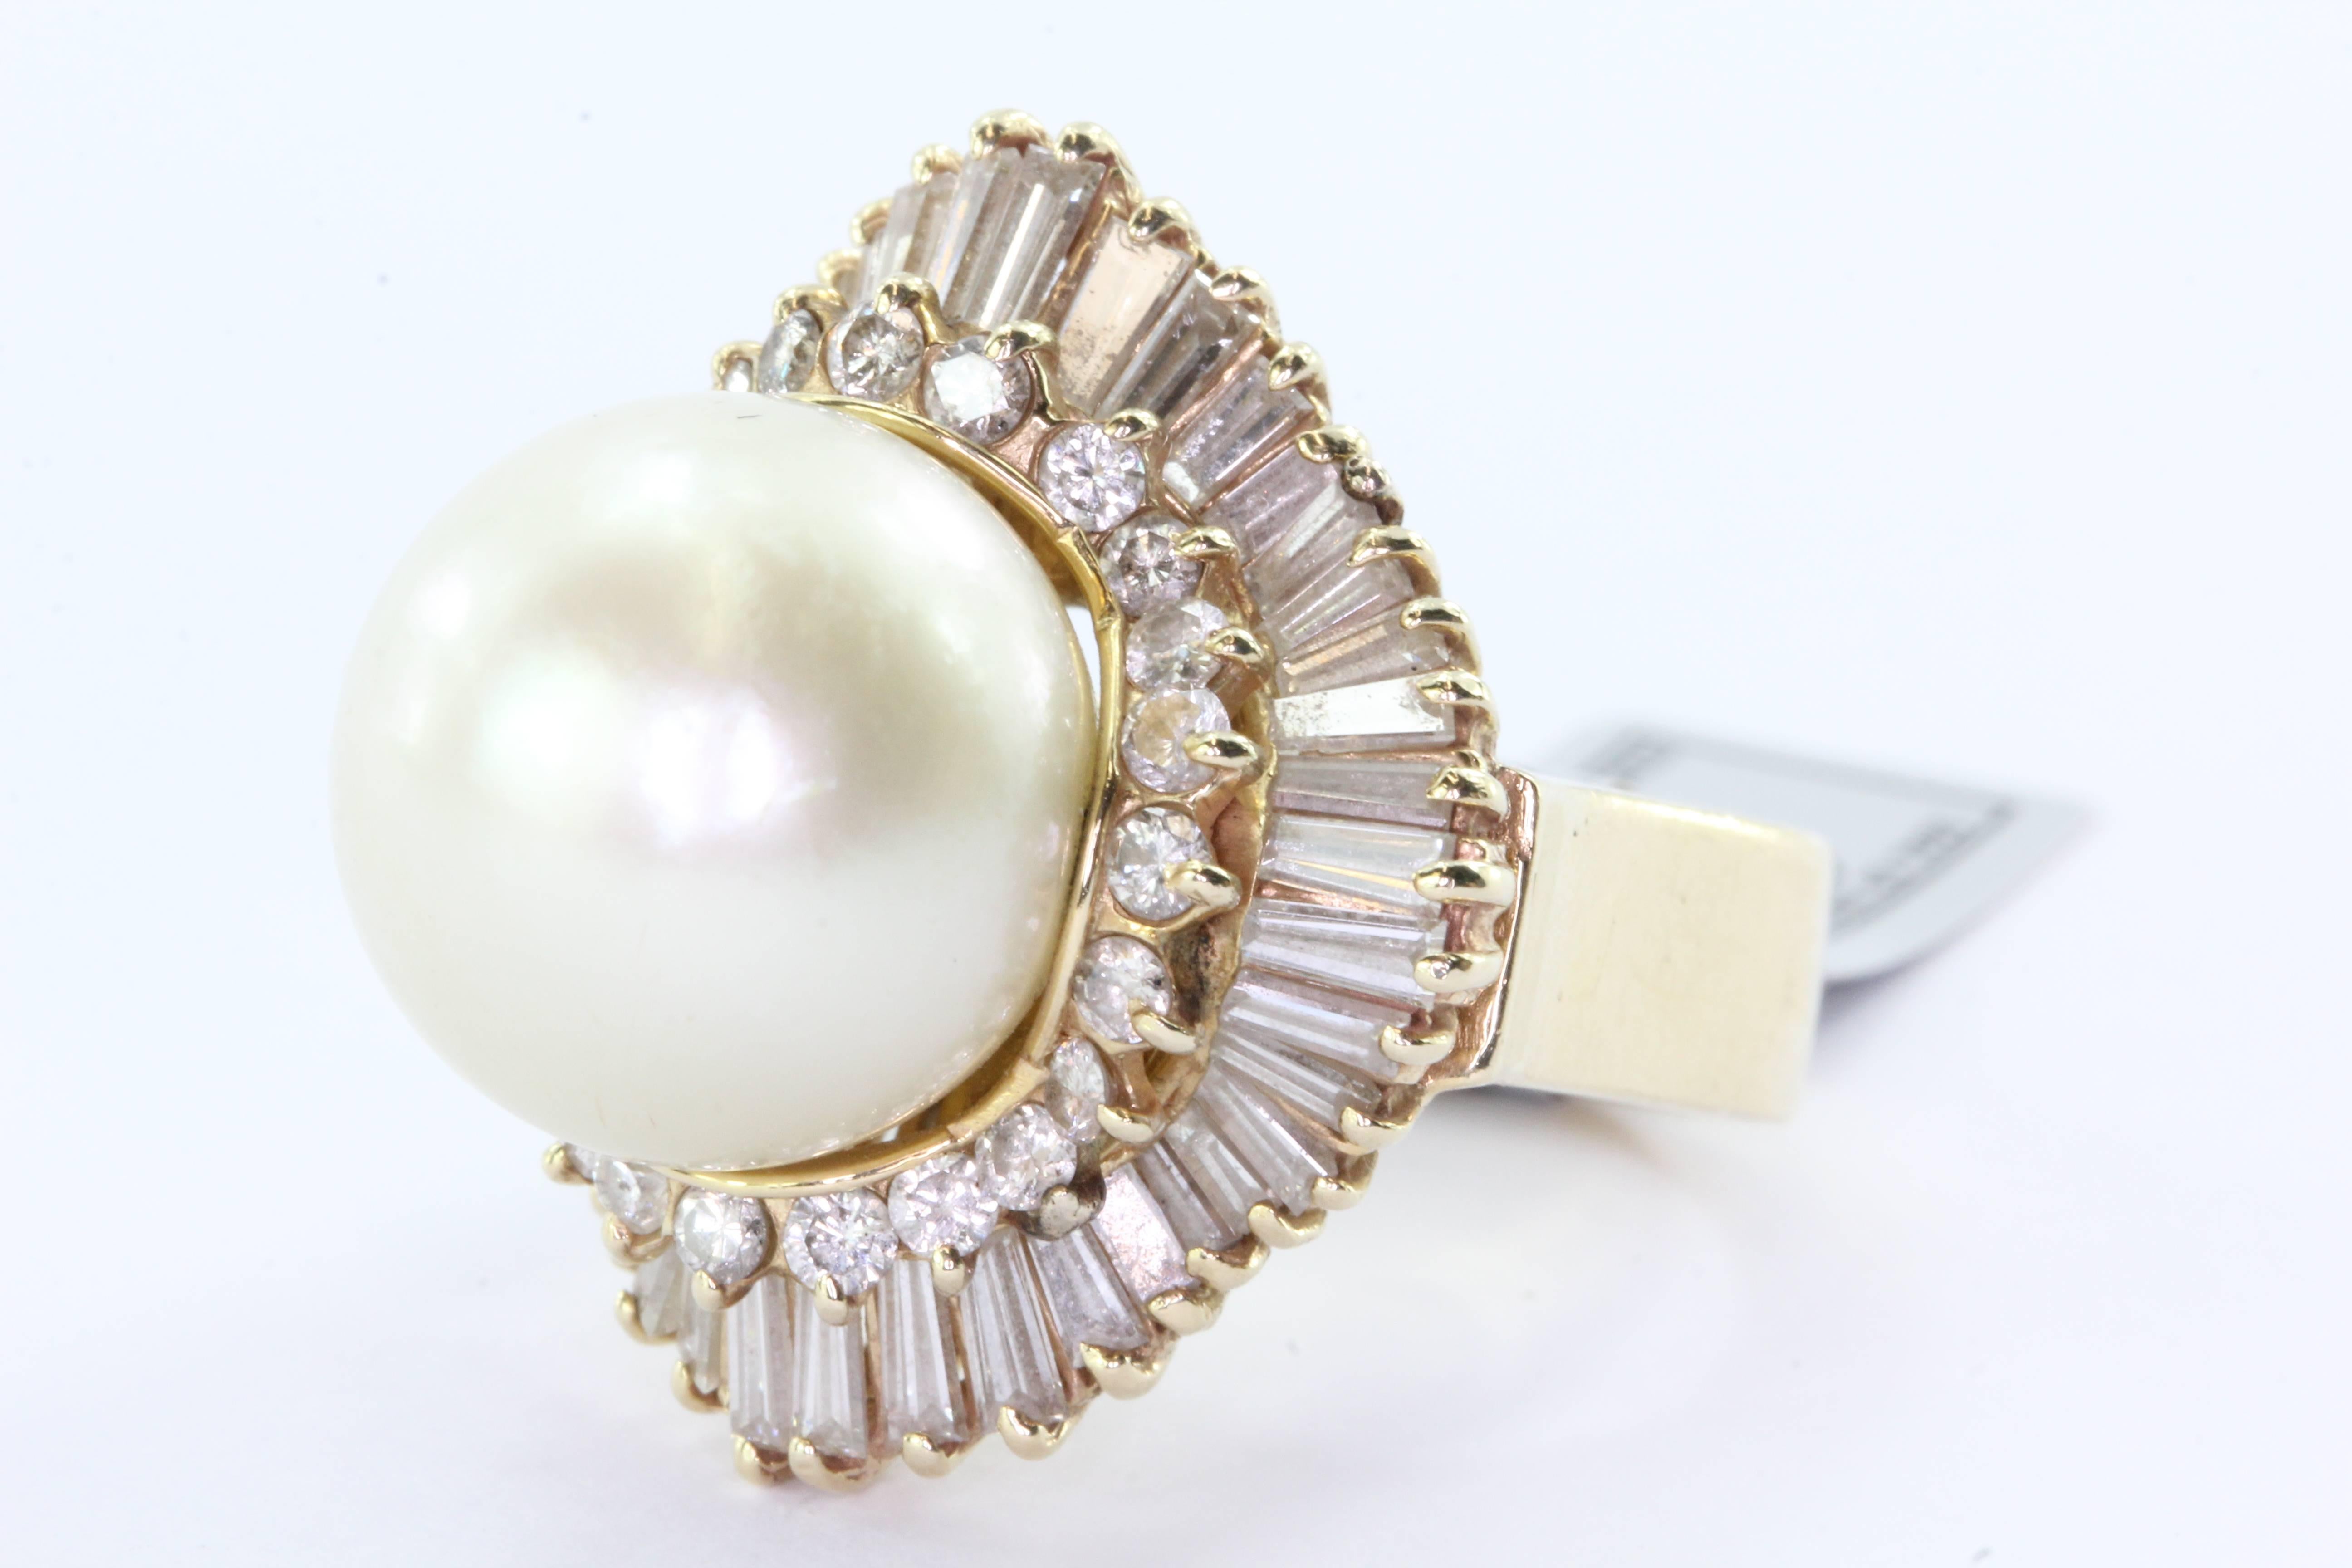 14K Gold Chunky 14mm Round Cream Rose Pearl Diamond Halo Ring. The ring is in excellent estate condition and ready to wear. The ring is hallmarked K14. The ring comes with an IGI appraisal. The pearls size is 13.5 - 14mm, it is round in shape,